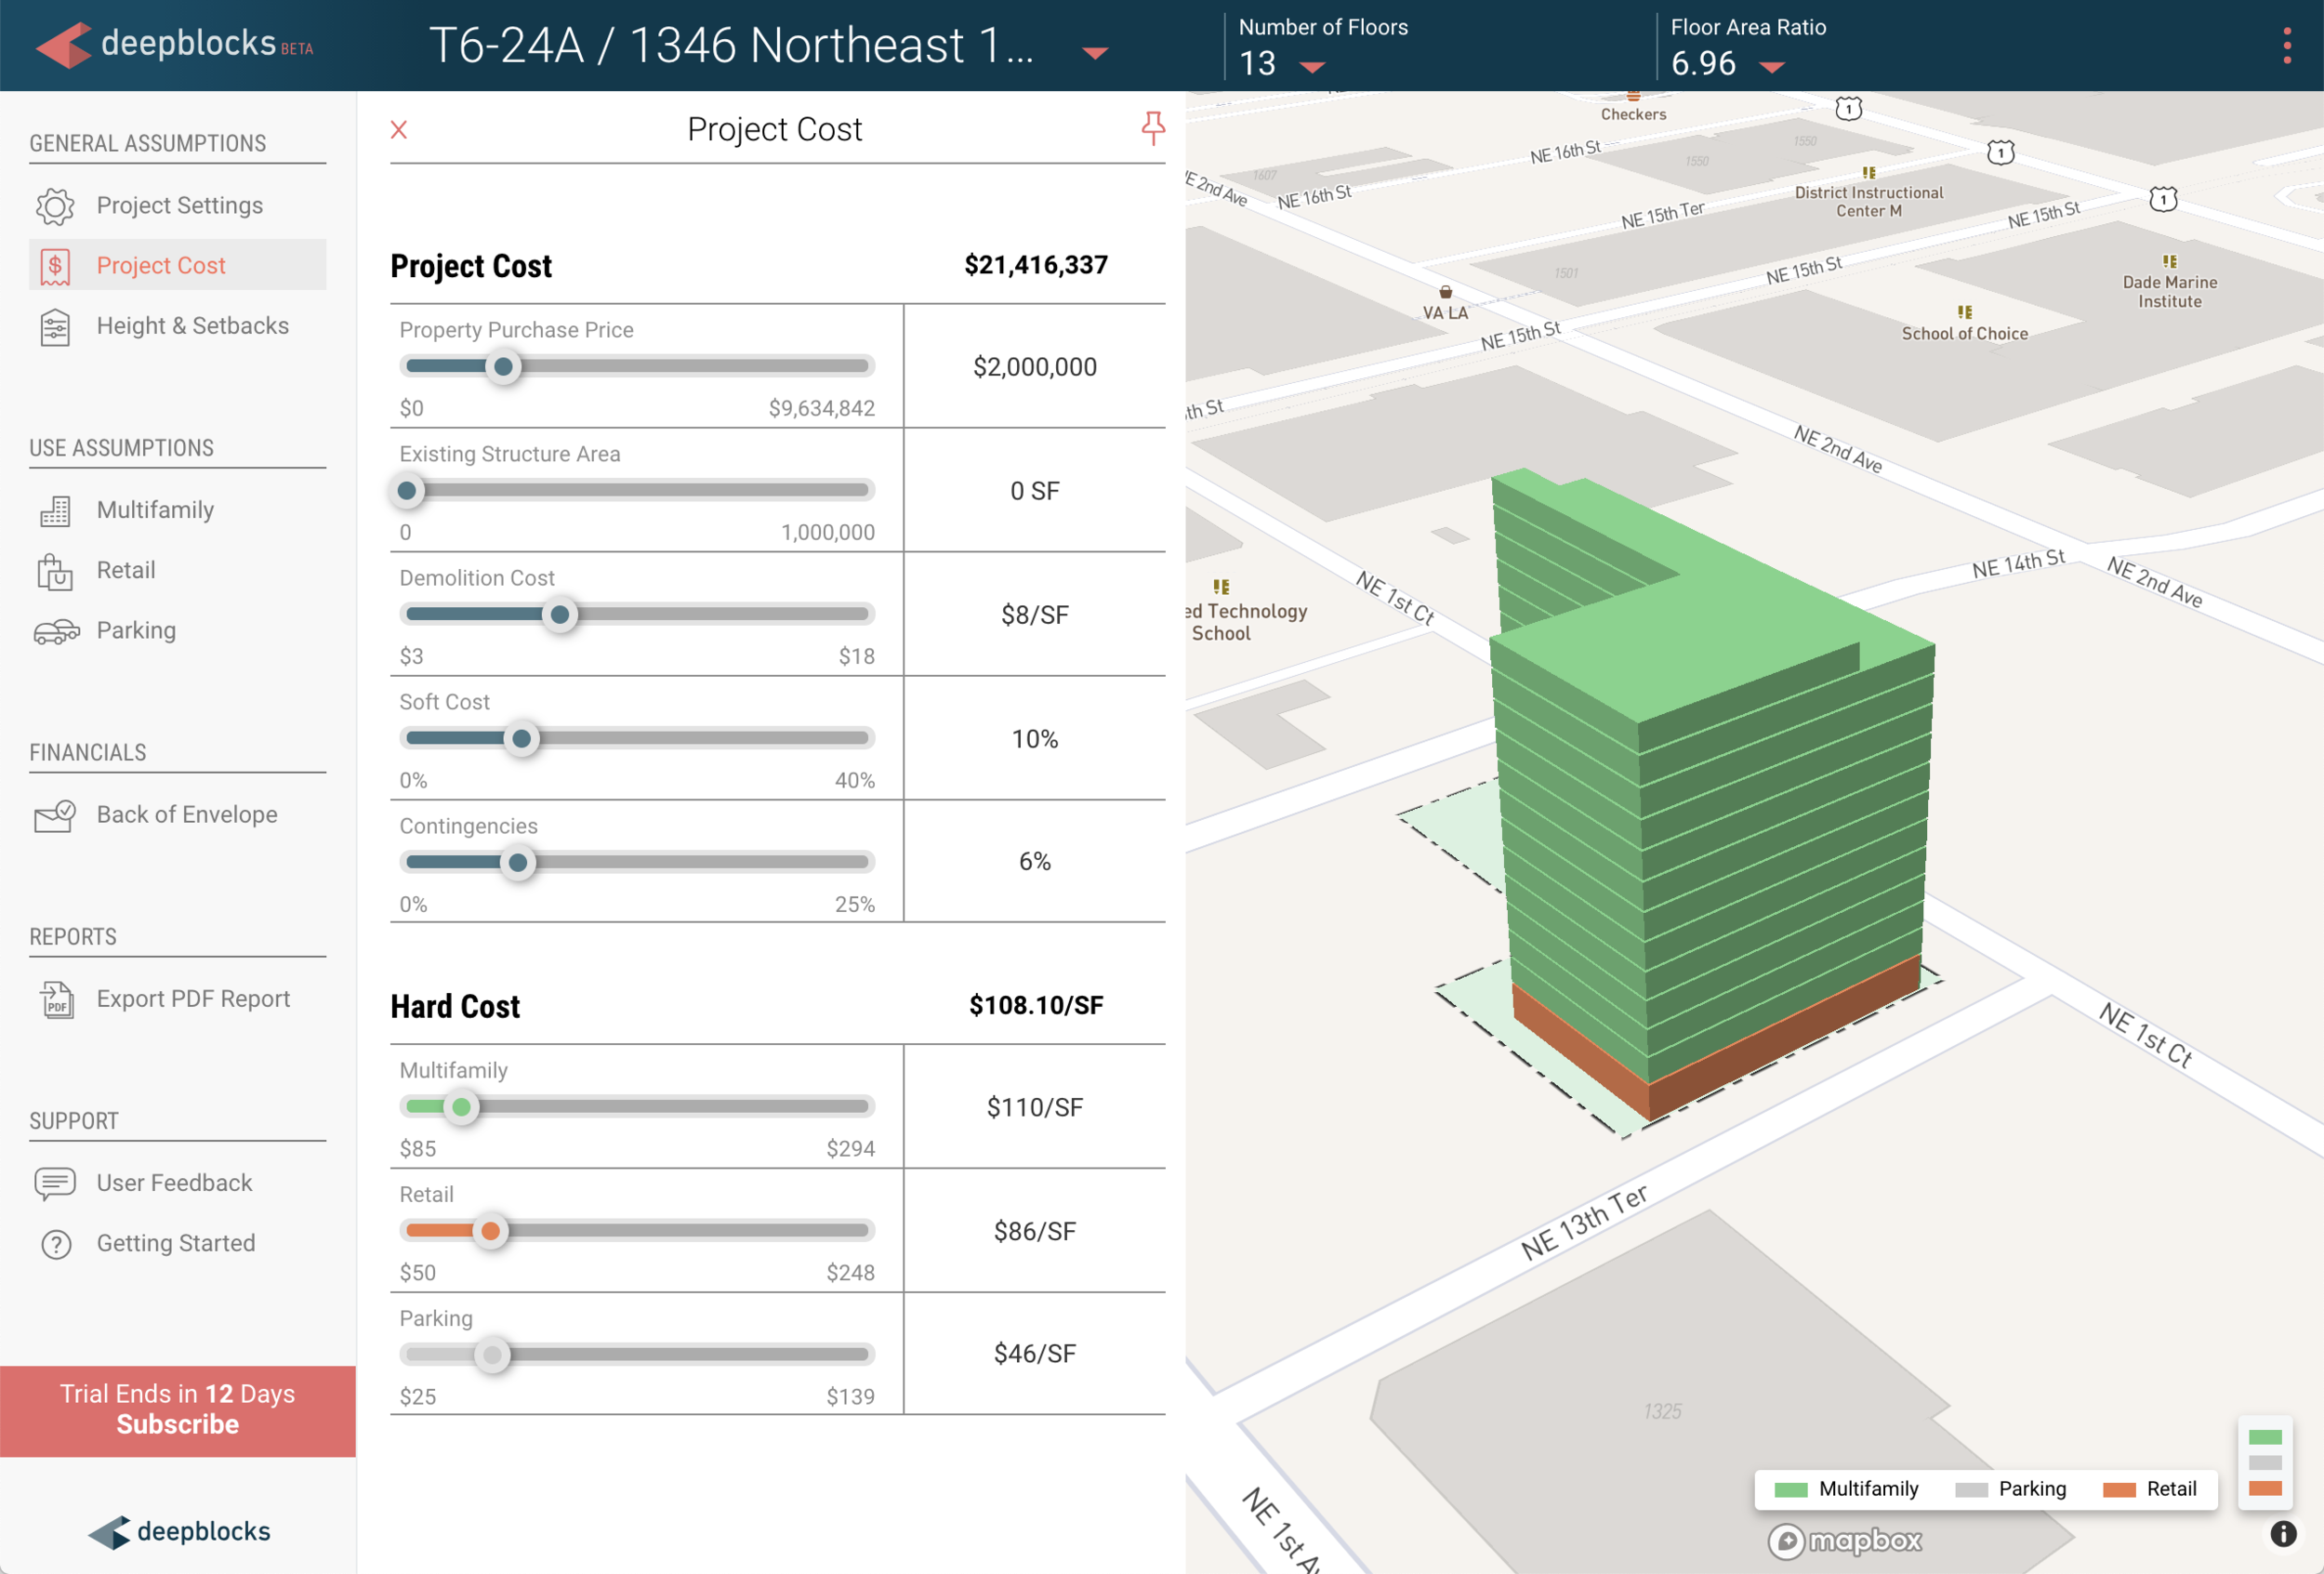 Using Deepblocks Beta software to analyze property potential and create feasibility study.